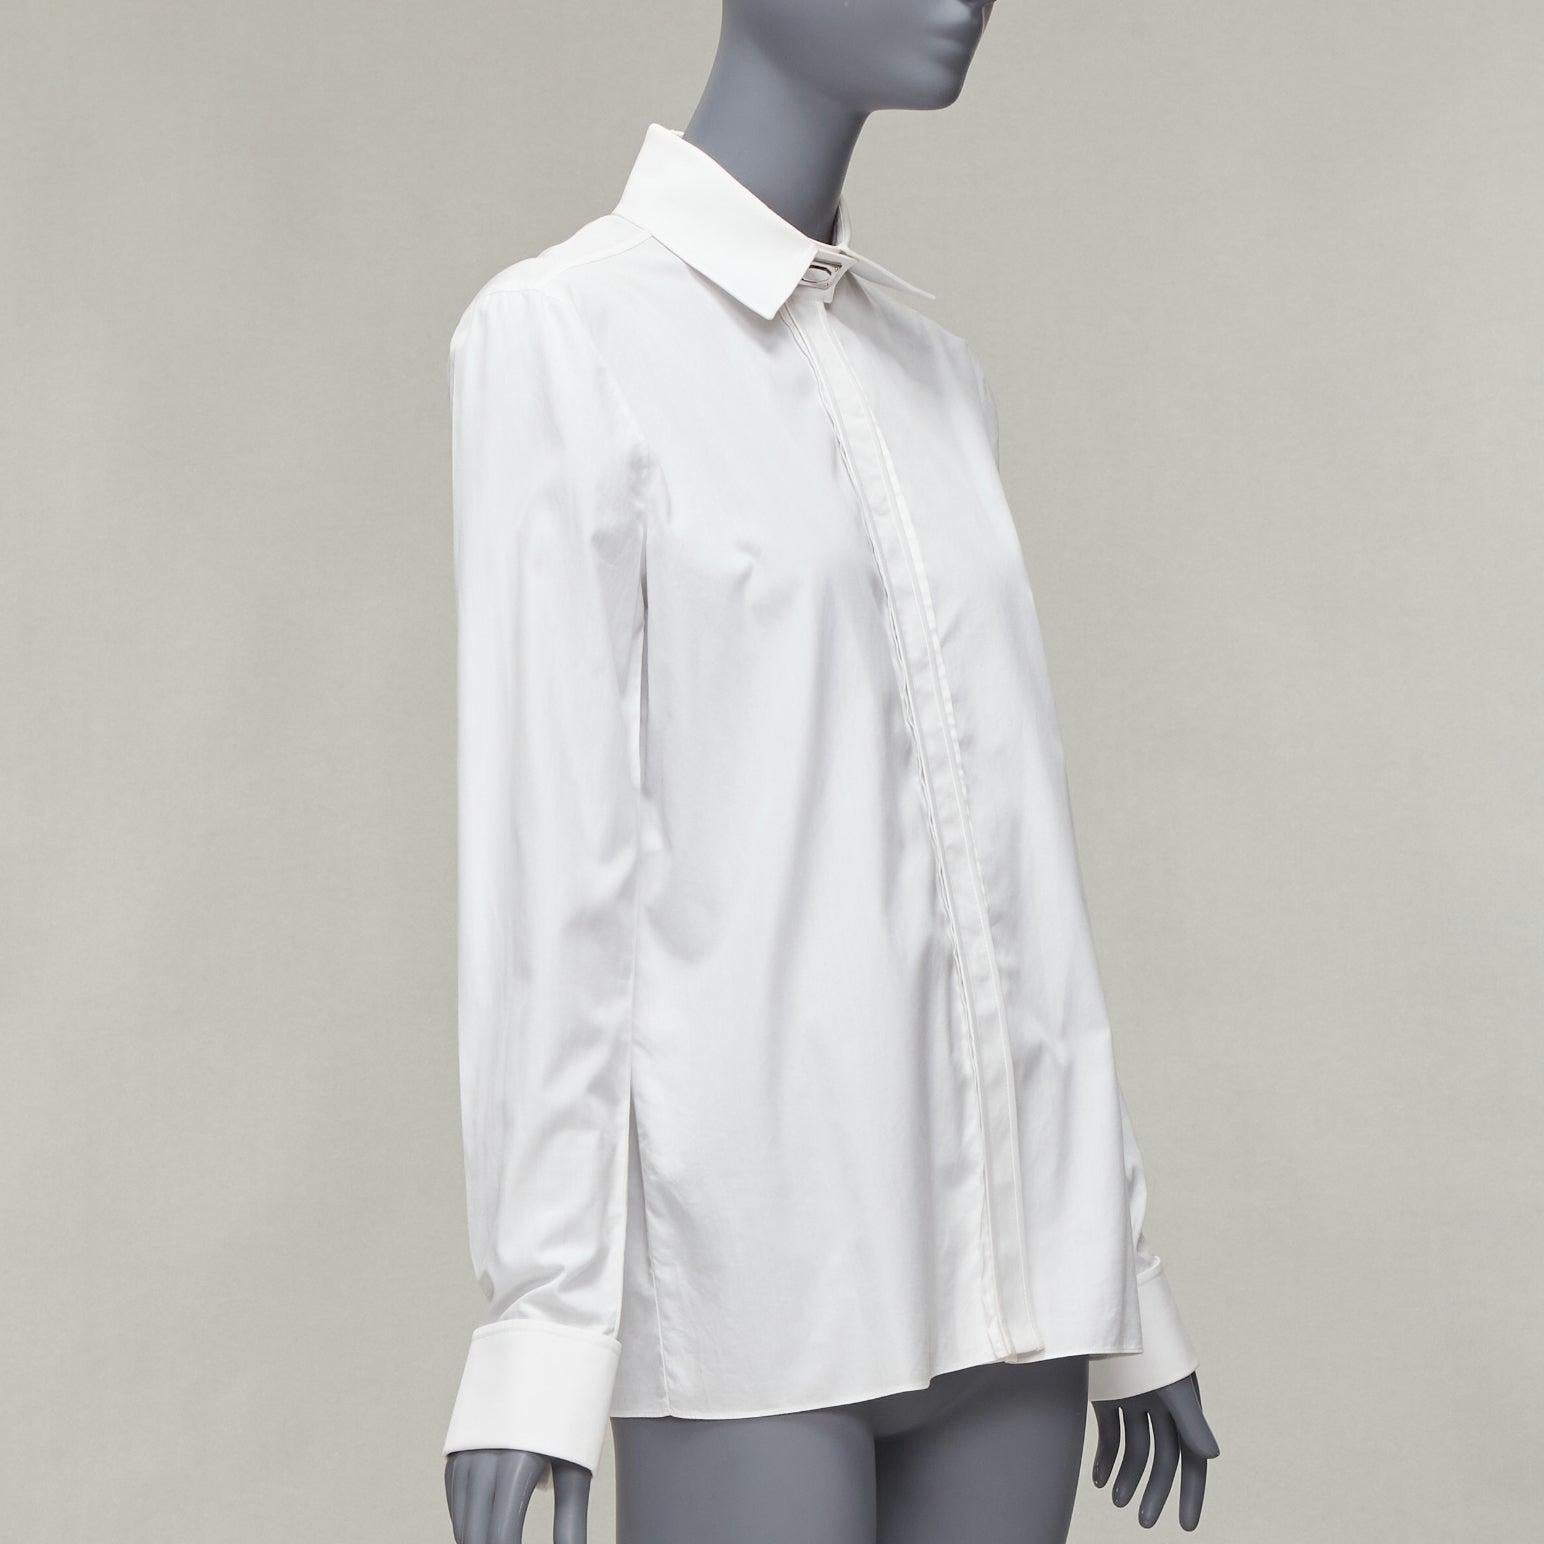 GIVENCHY Riccardo Tisci silver metal button collar white cotton shirt FR40 L In Good Condition For Sale In Hong Kong, NT